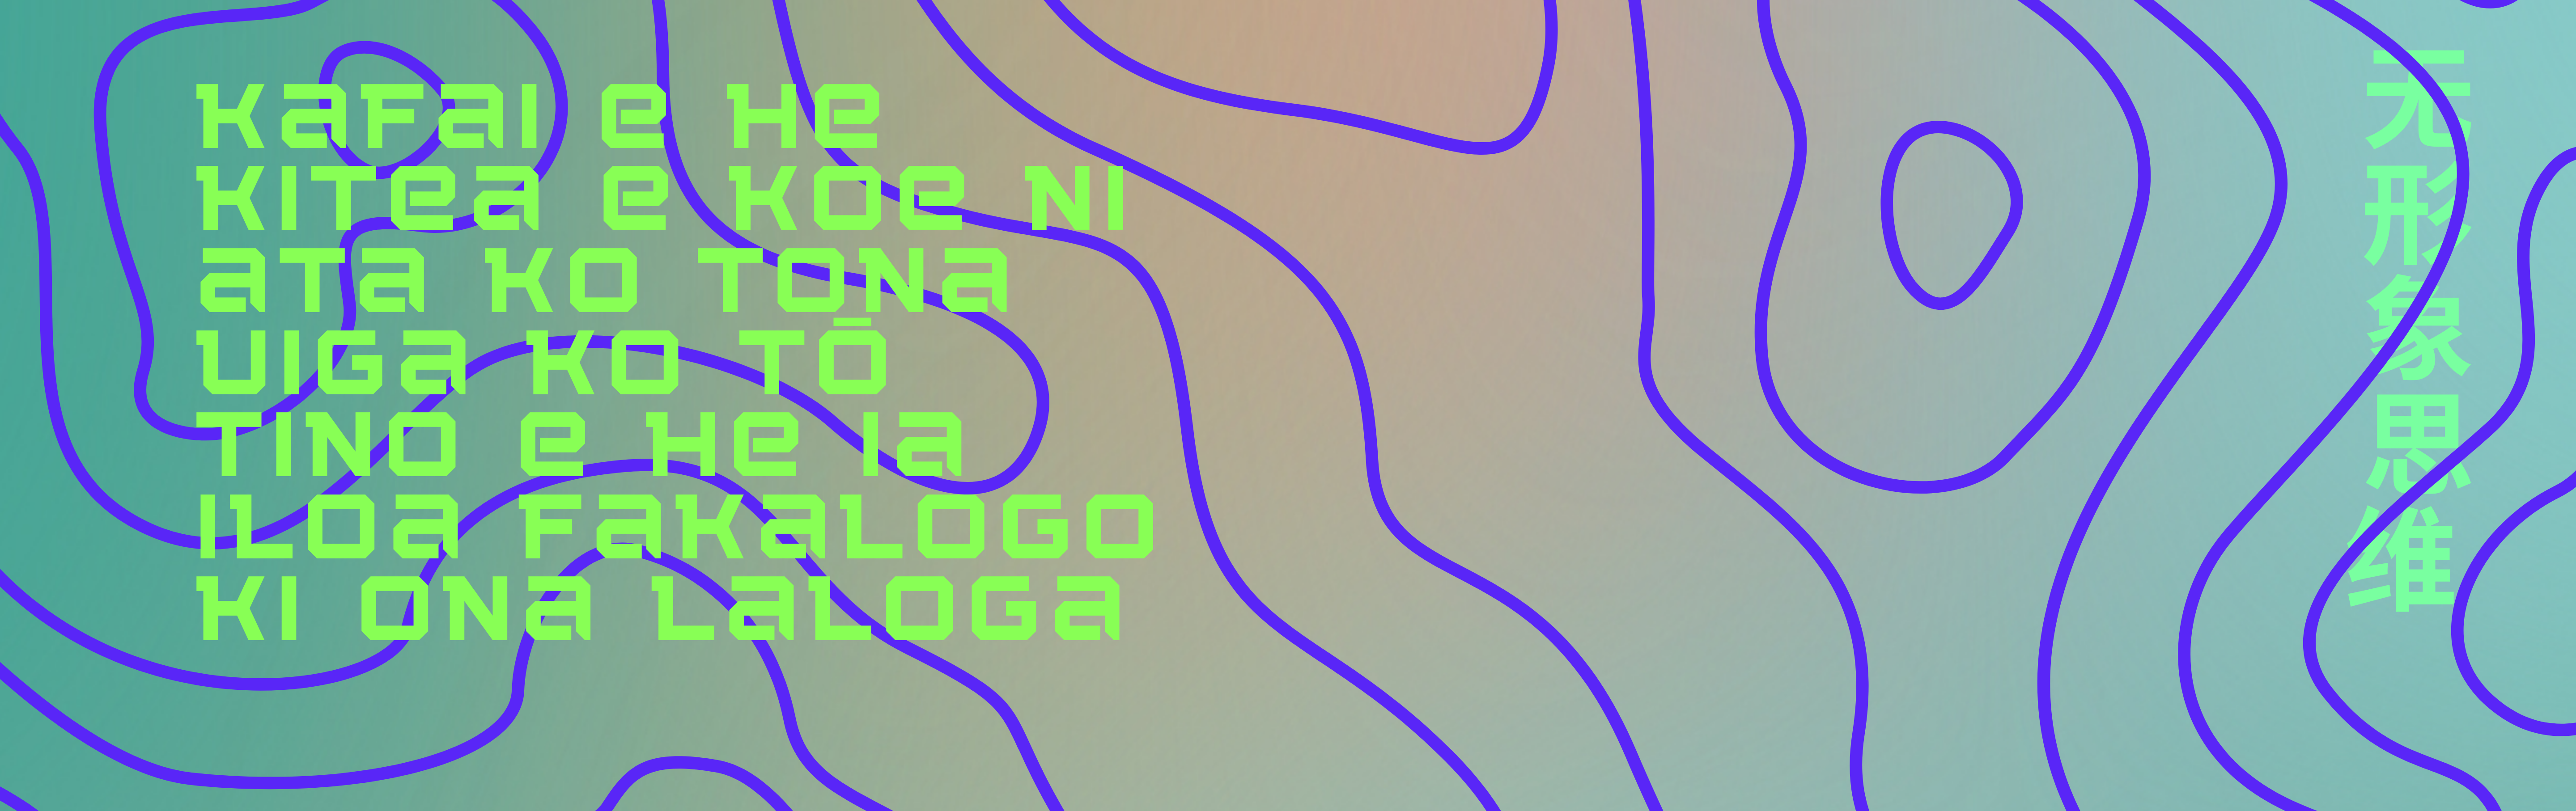 Toe Fai! - A blue-green and orange background to bright blue contour lines showing the text of the project title in Gagana Tokelau, Vosa vakaviti and Cantonese.